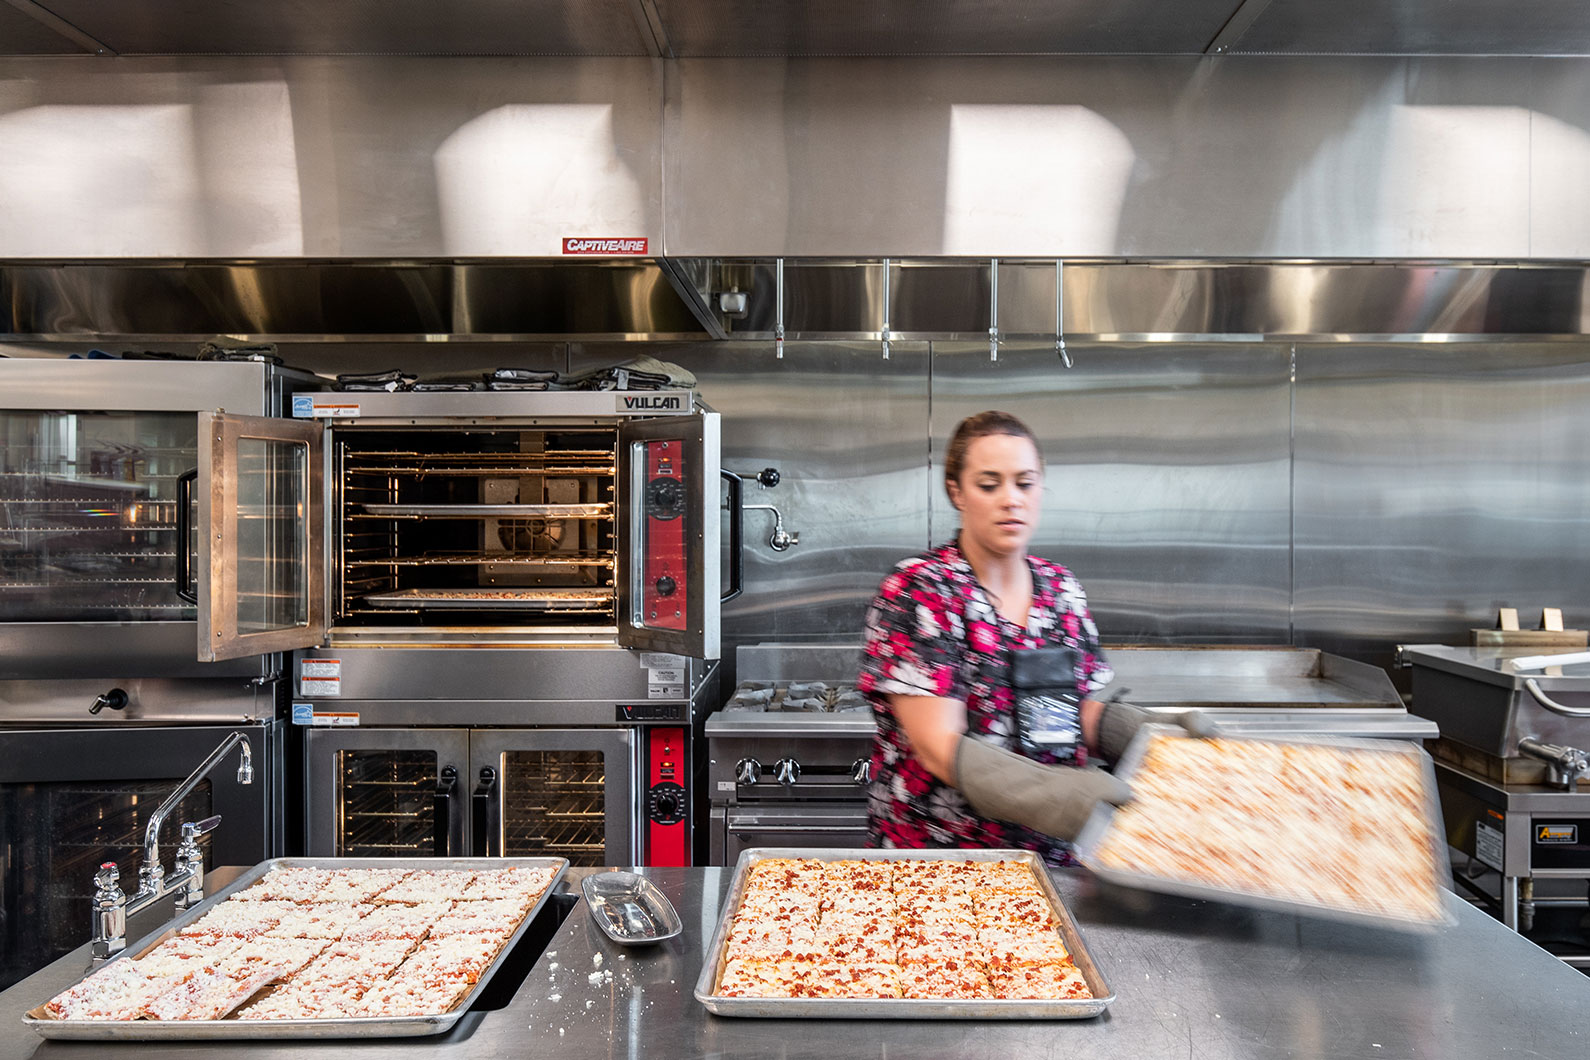 Clear Lake High School Food Services photo of woman preparing pizza lunch for students 